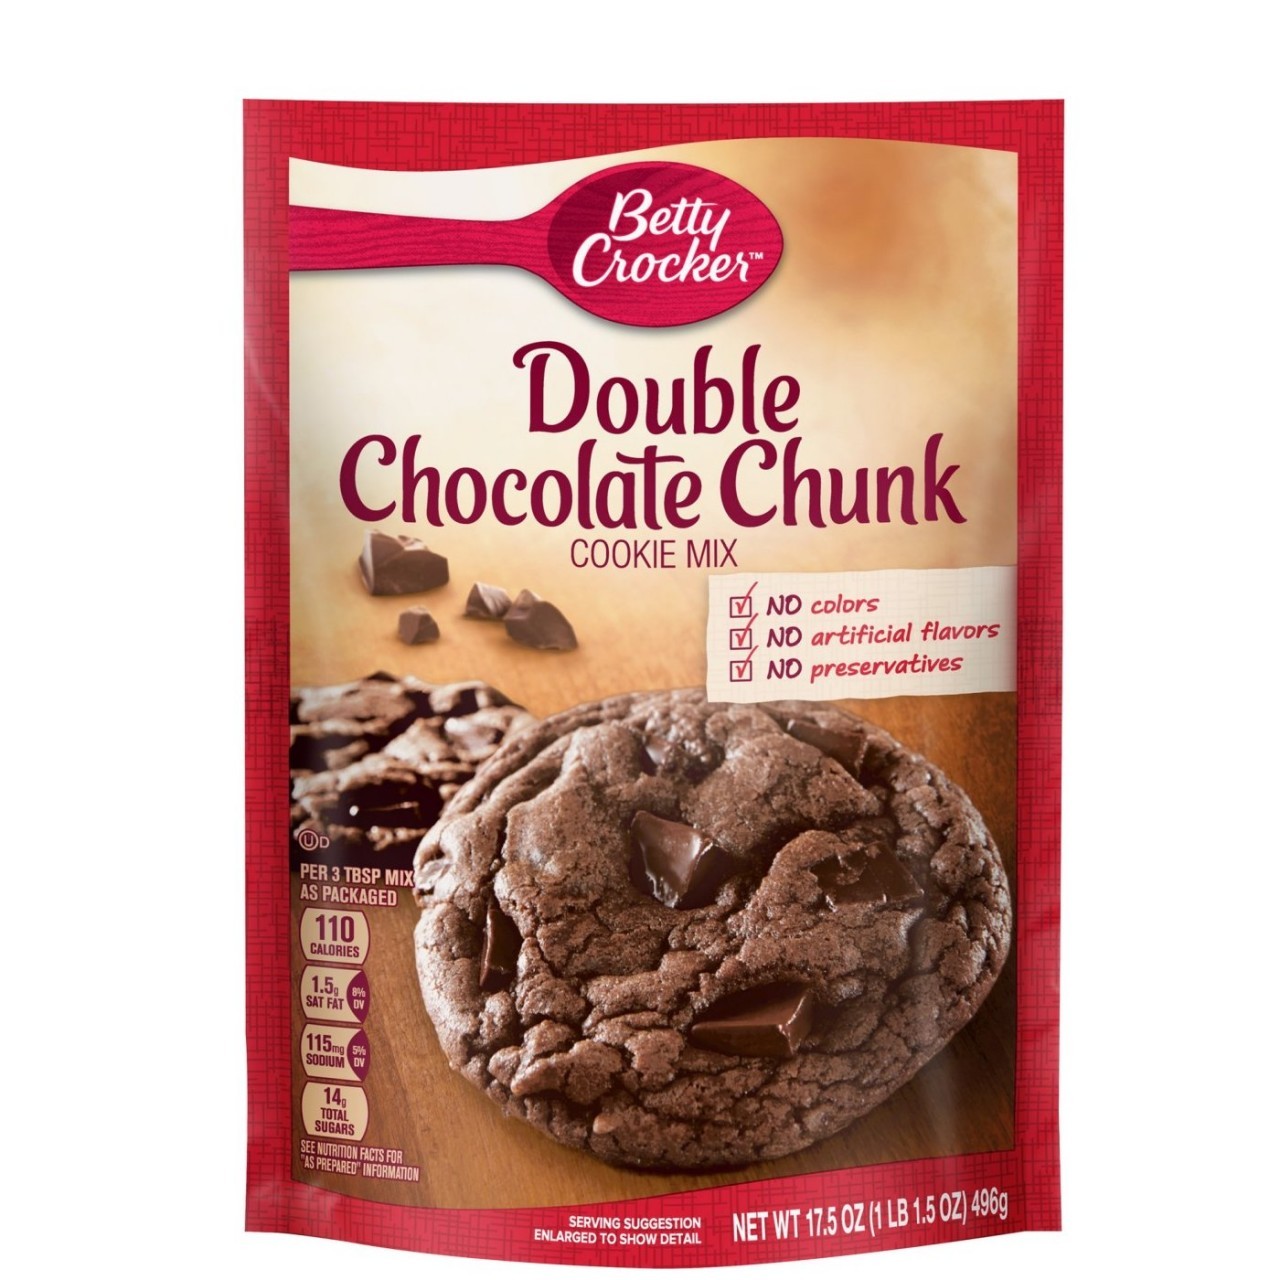 BETTY CRKR COOKIE DOUBLE CHOC CHUNK 496g